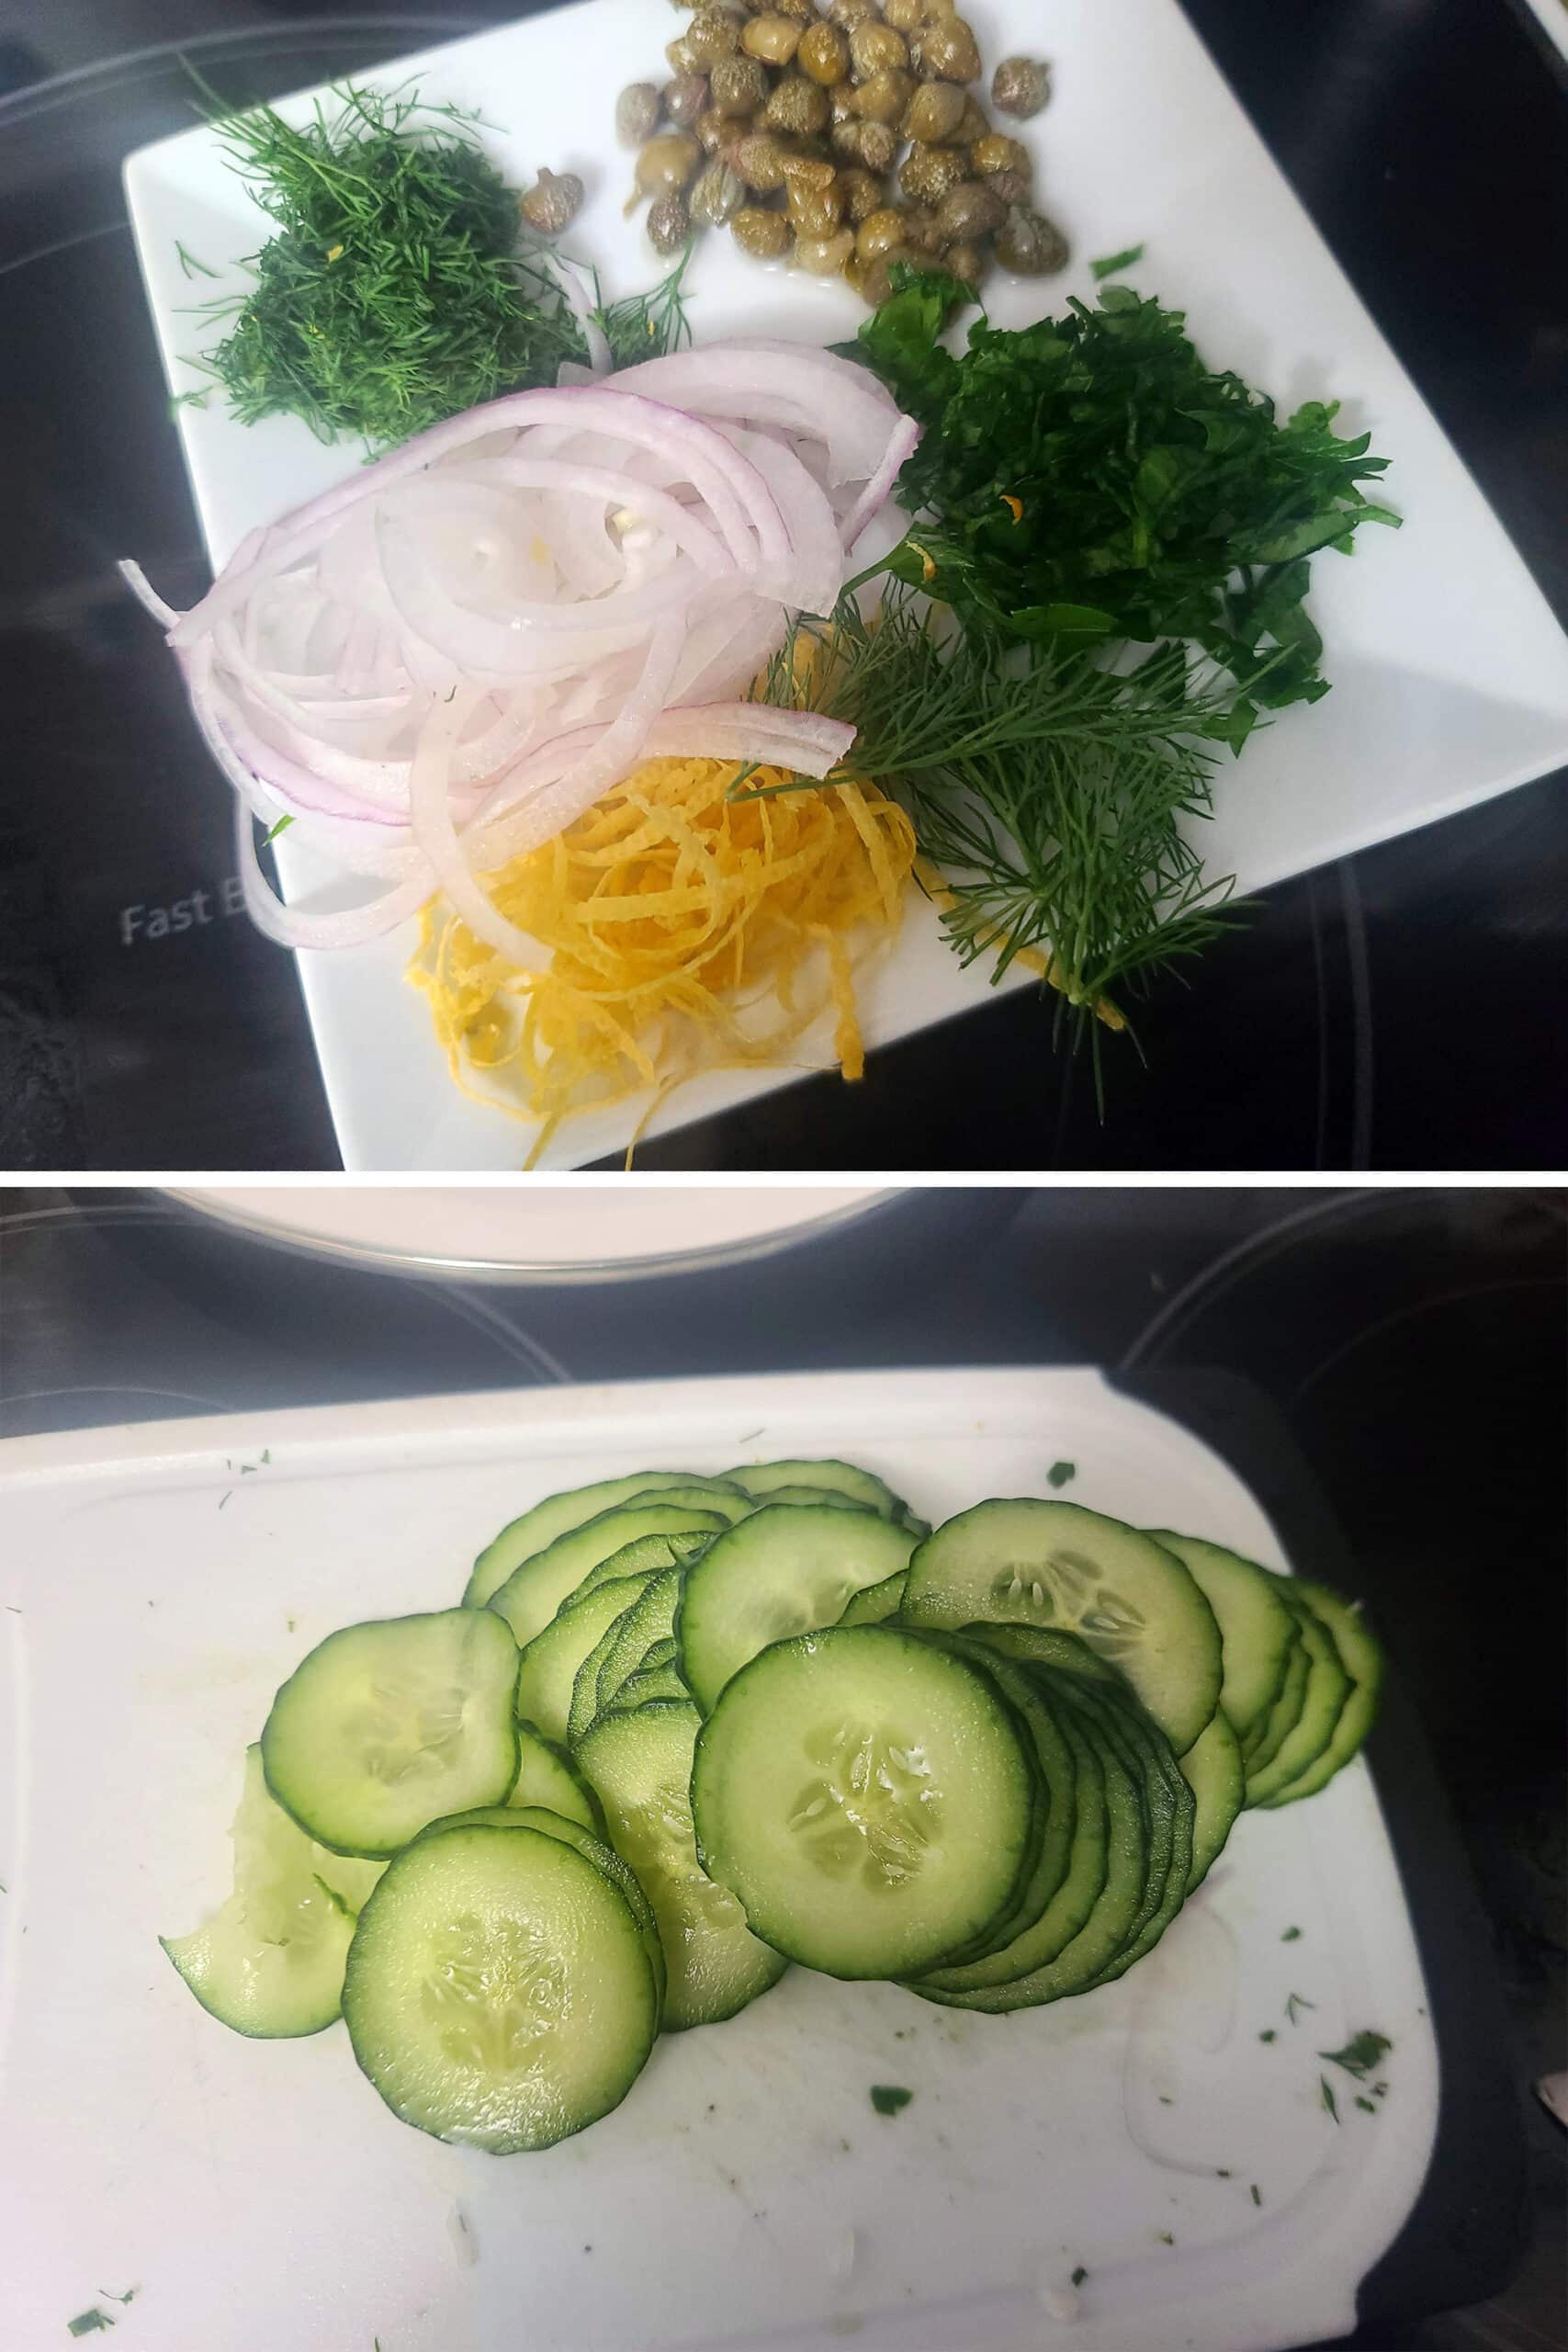 A 2 part image showing a plate of the prepared toppings, and a cutting board with thinly sliced cucumber on it.